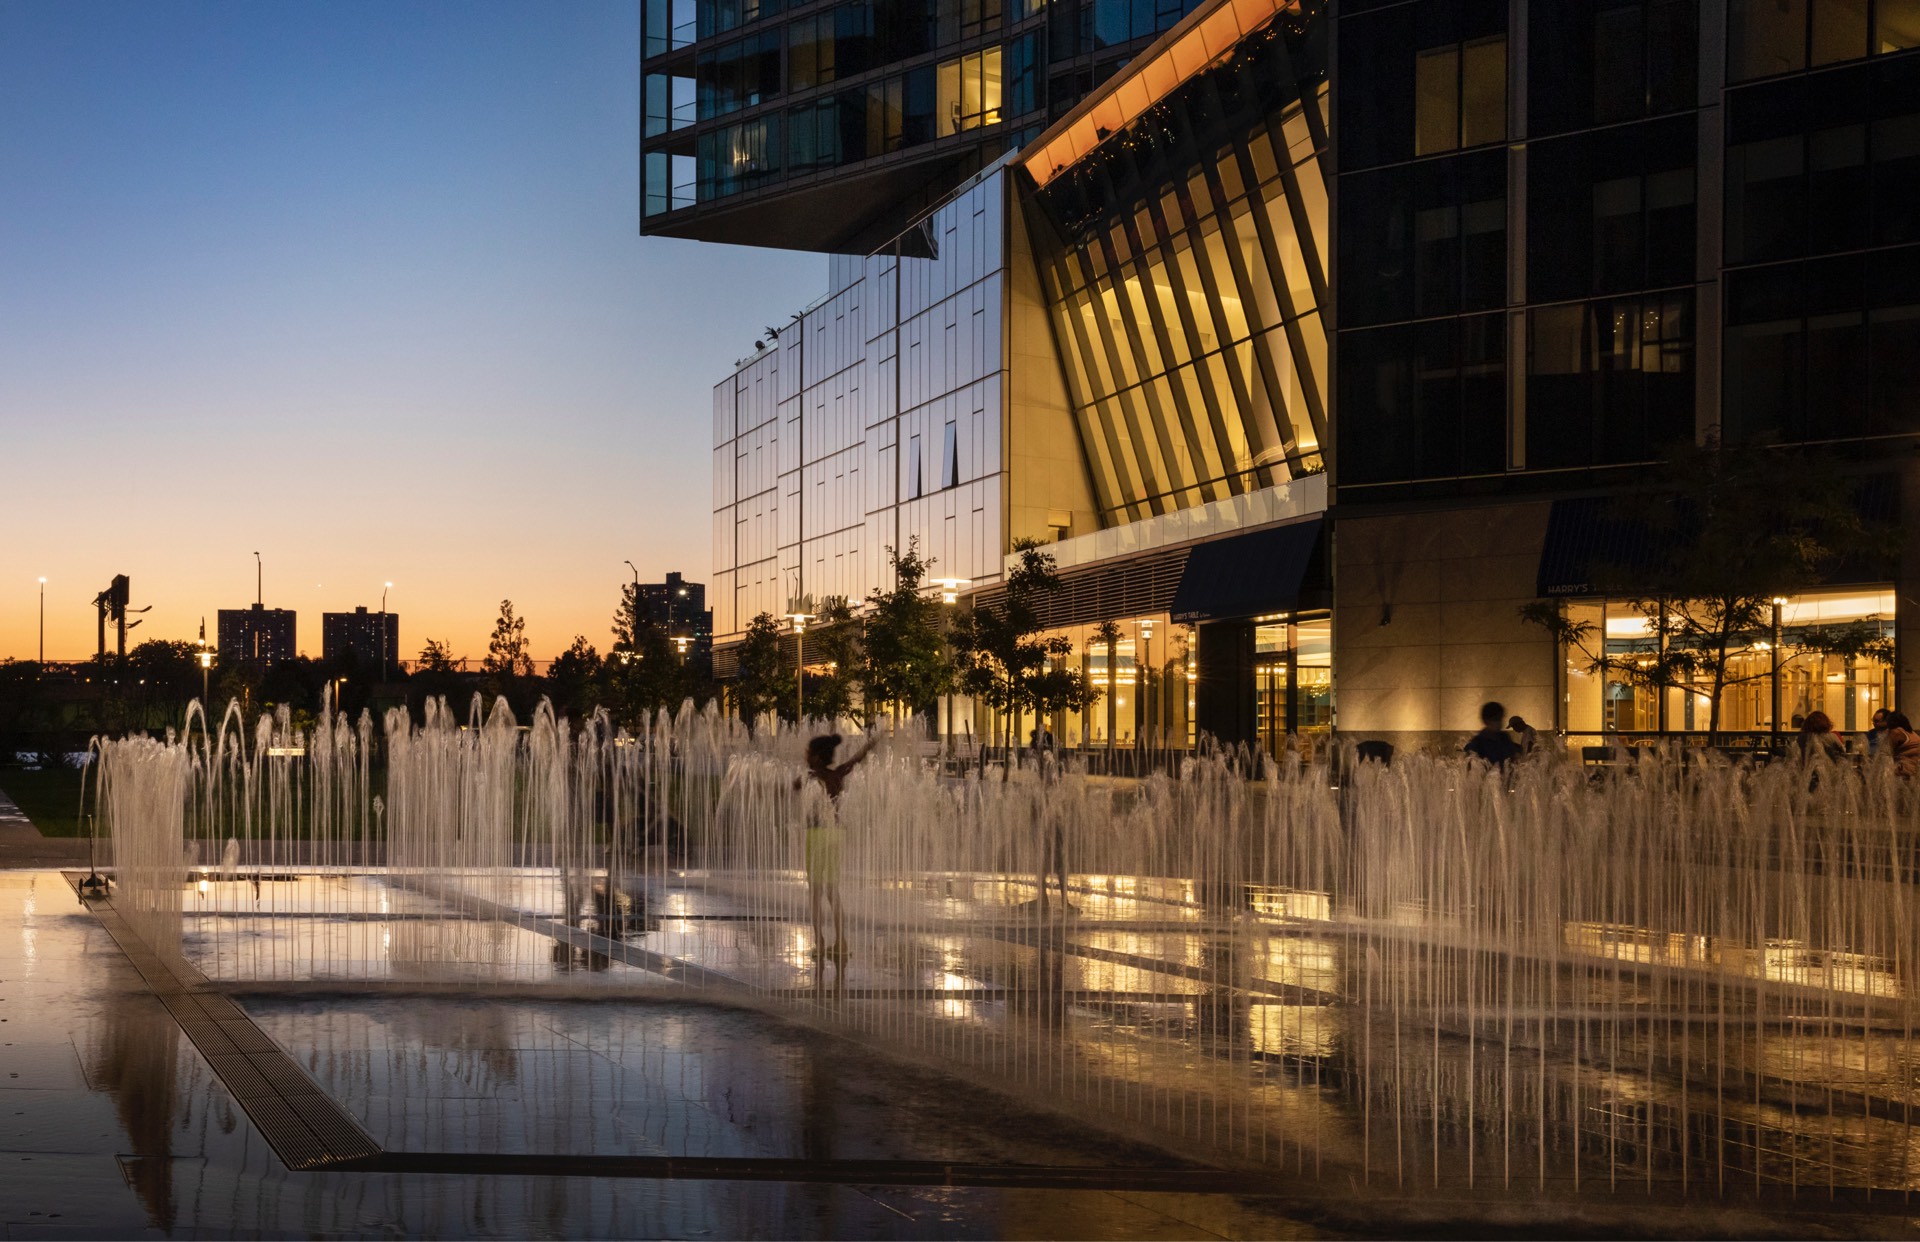 Urban twilight at a modern plaza with illuminated water fountains and sleek architectural buildings, where silhouettes of people enjoy a serene evening outdoors.